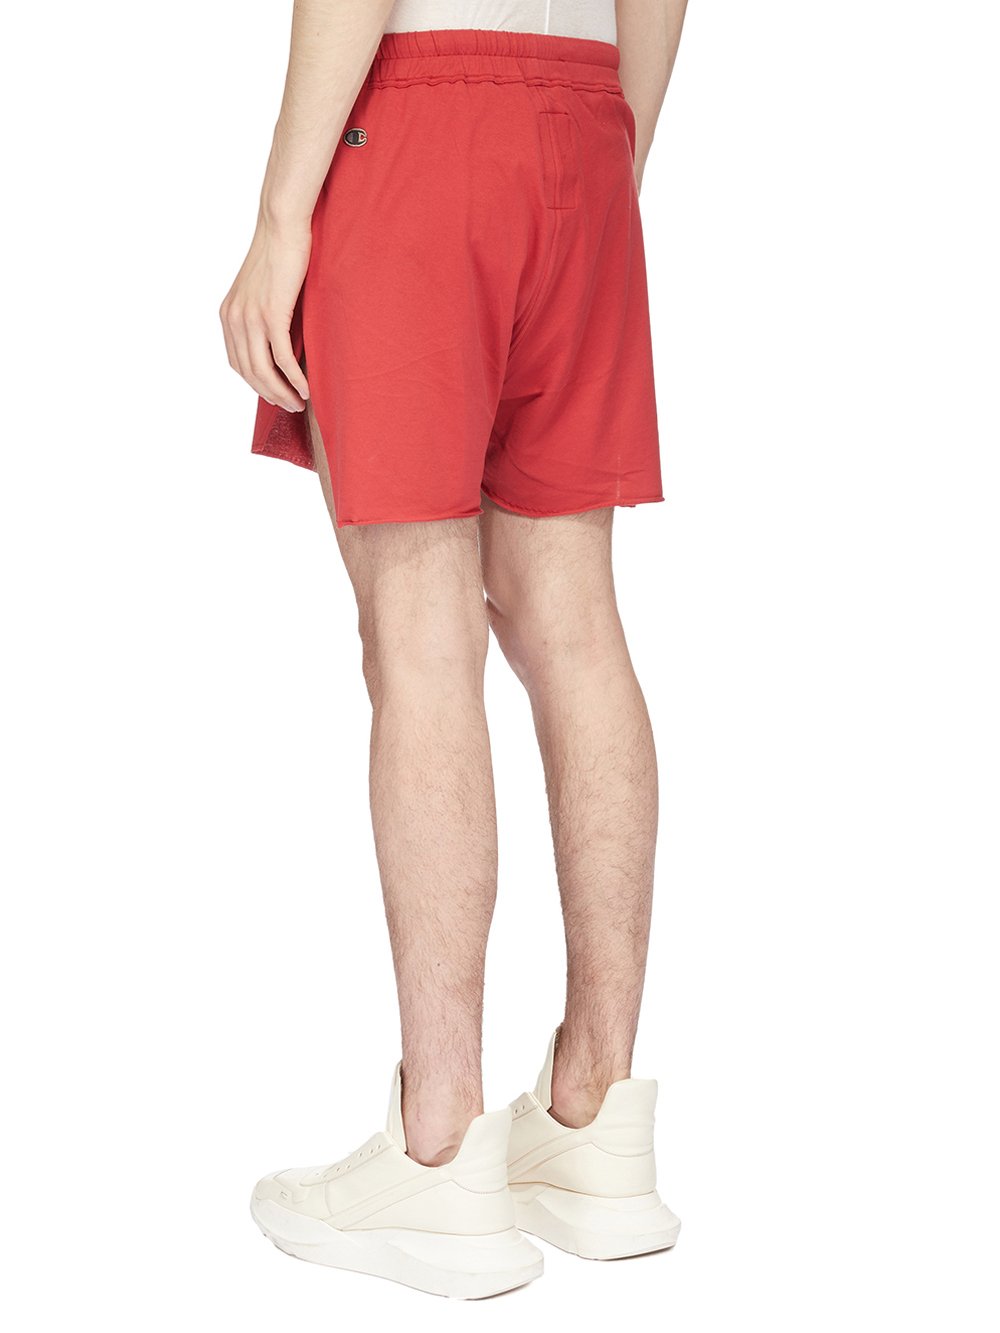 CHAMPION X RICK OWENS DOLPHIN BOXERS IN CARNELIAN RED MEDIUM WEIGHT COTTON JERSEY 